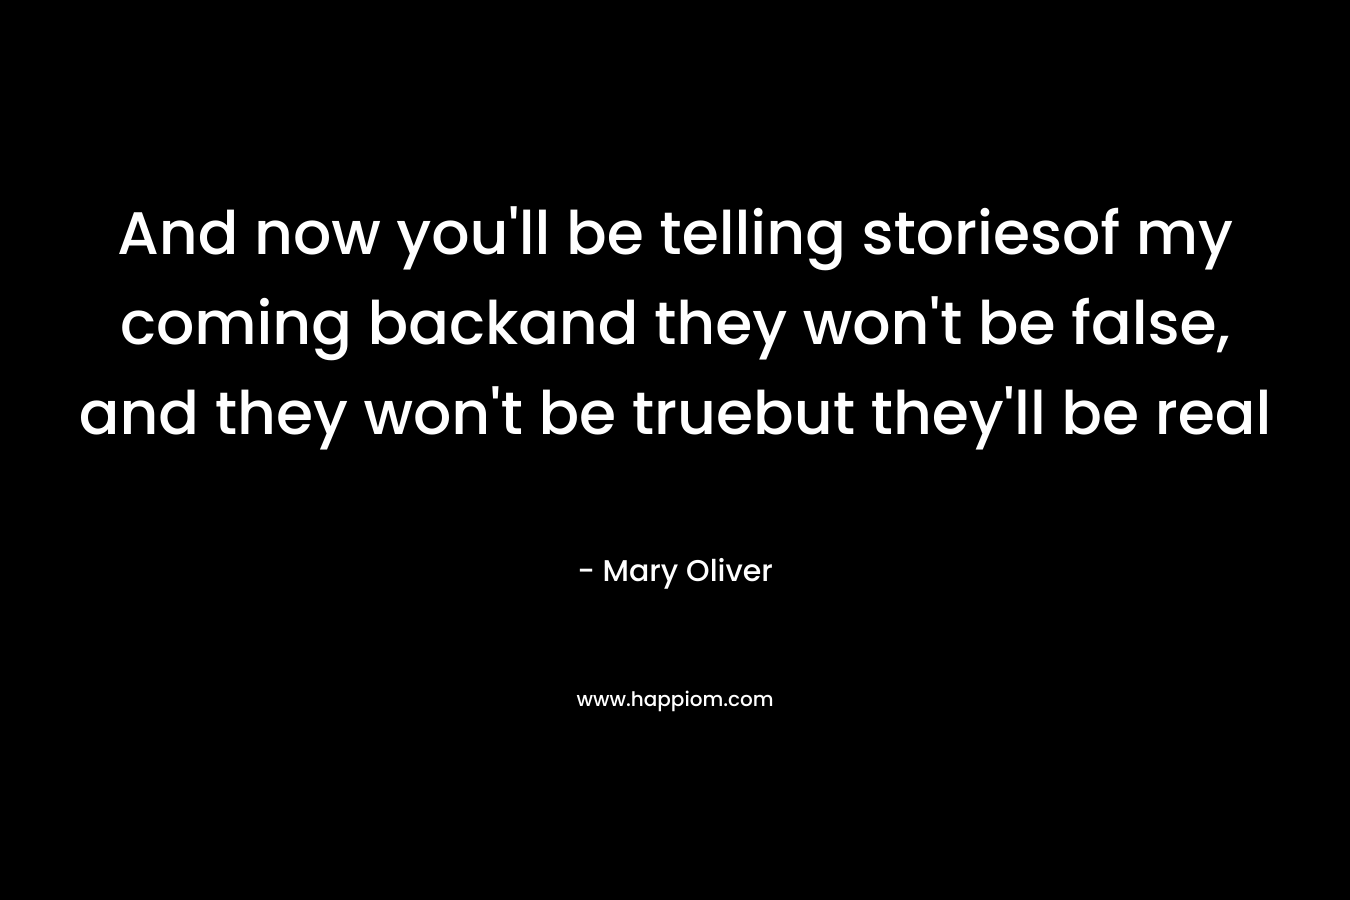 And now you’ll be telling storiesof my coming backand they won’t be false, and they won’t be truebut they’ll be real – Mary Oliver